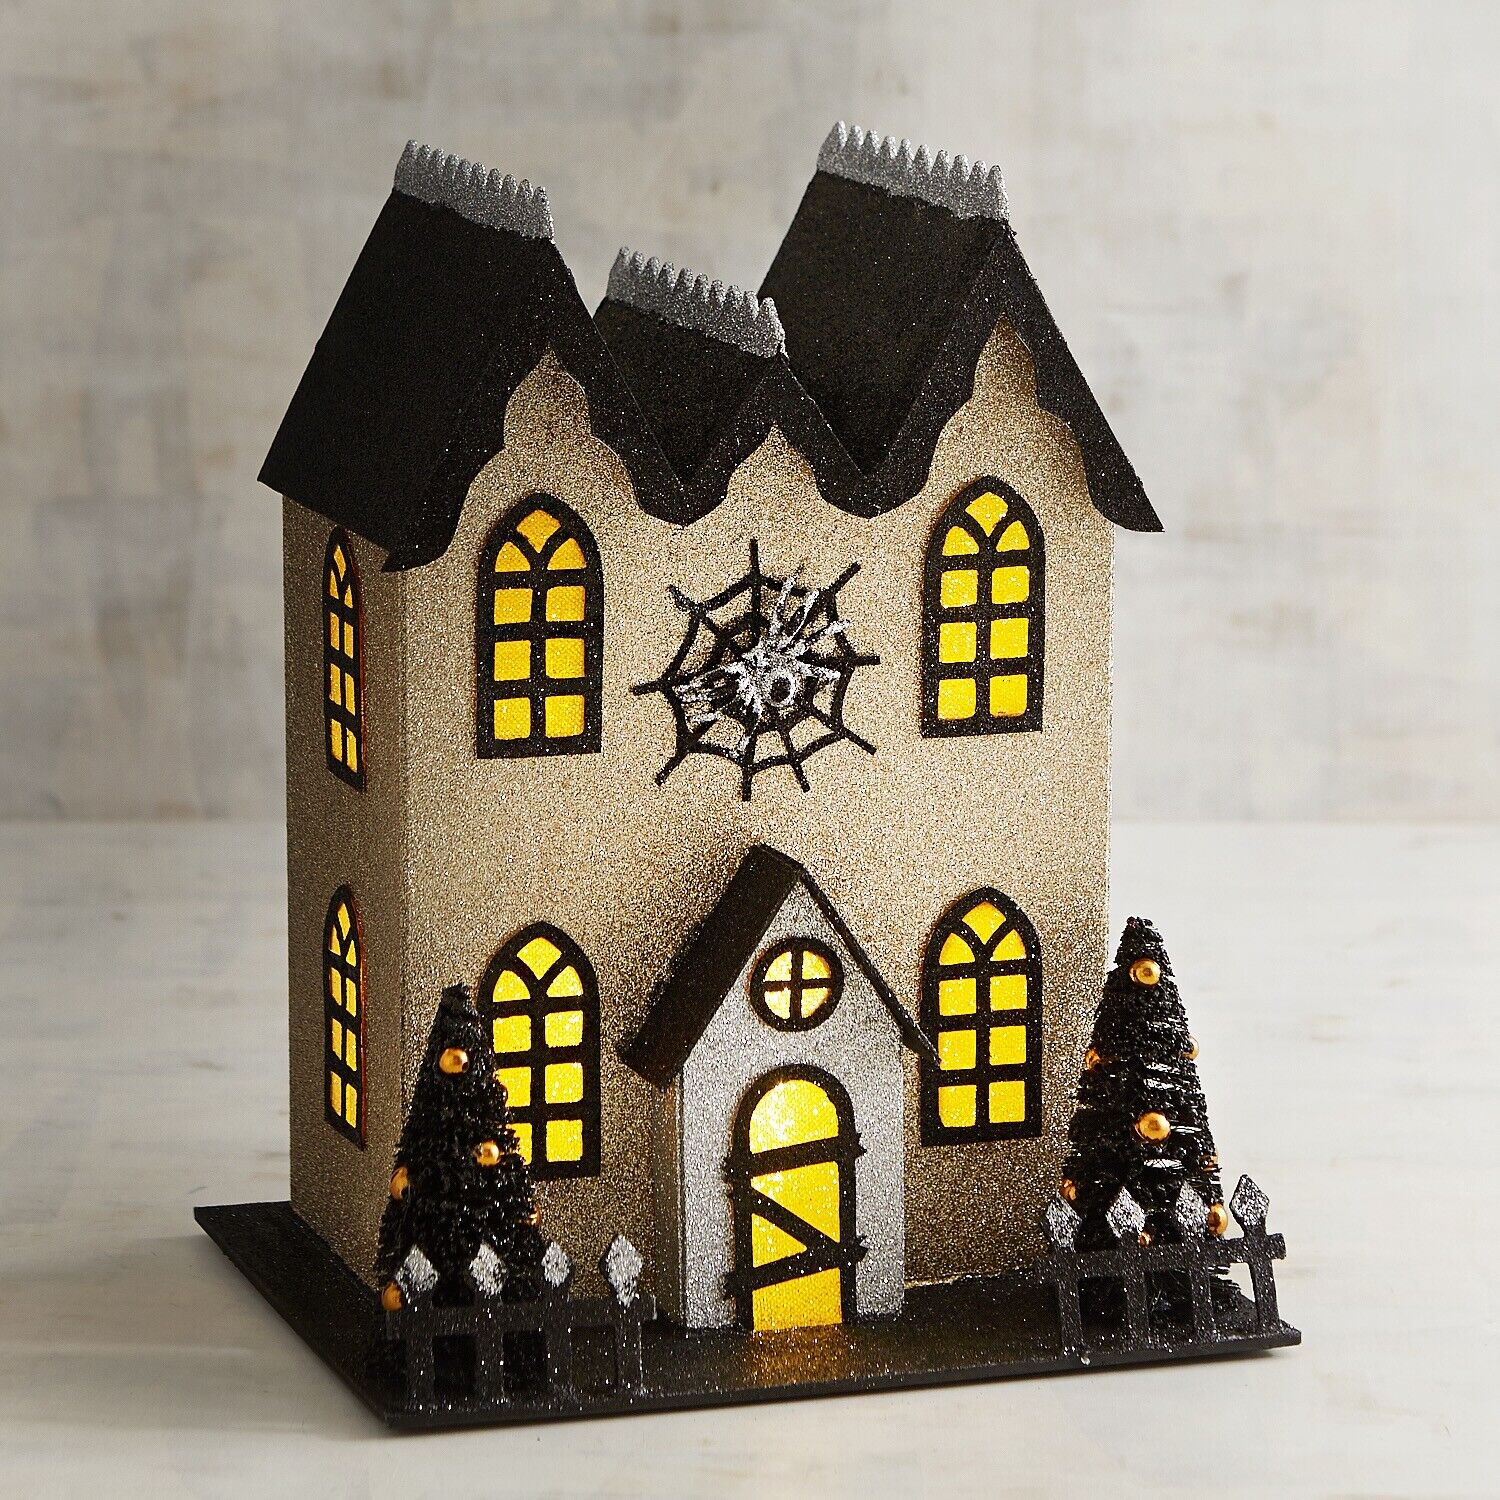 Pier 1 Imports LED Light UP Halloween Gold Glittered Spider Haunted House